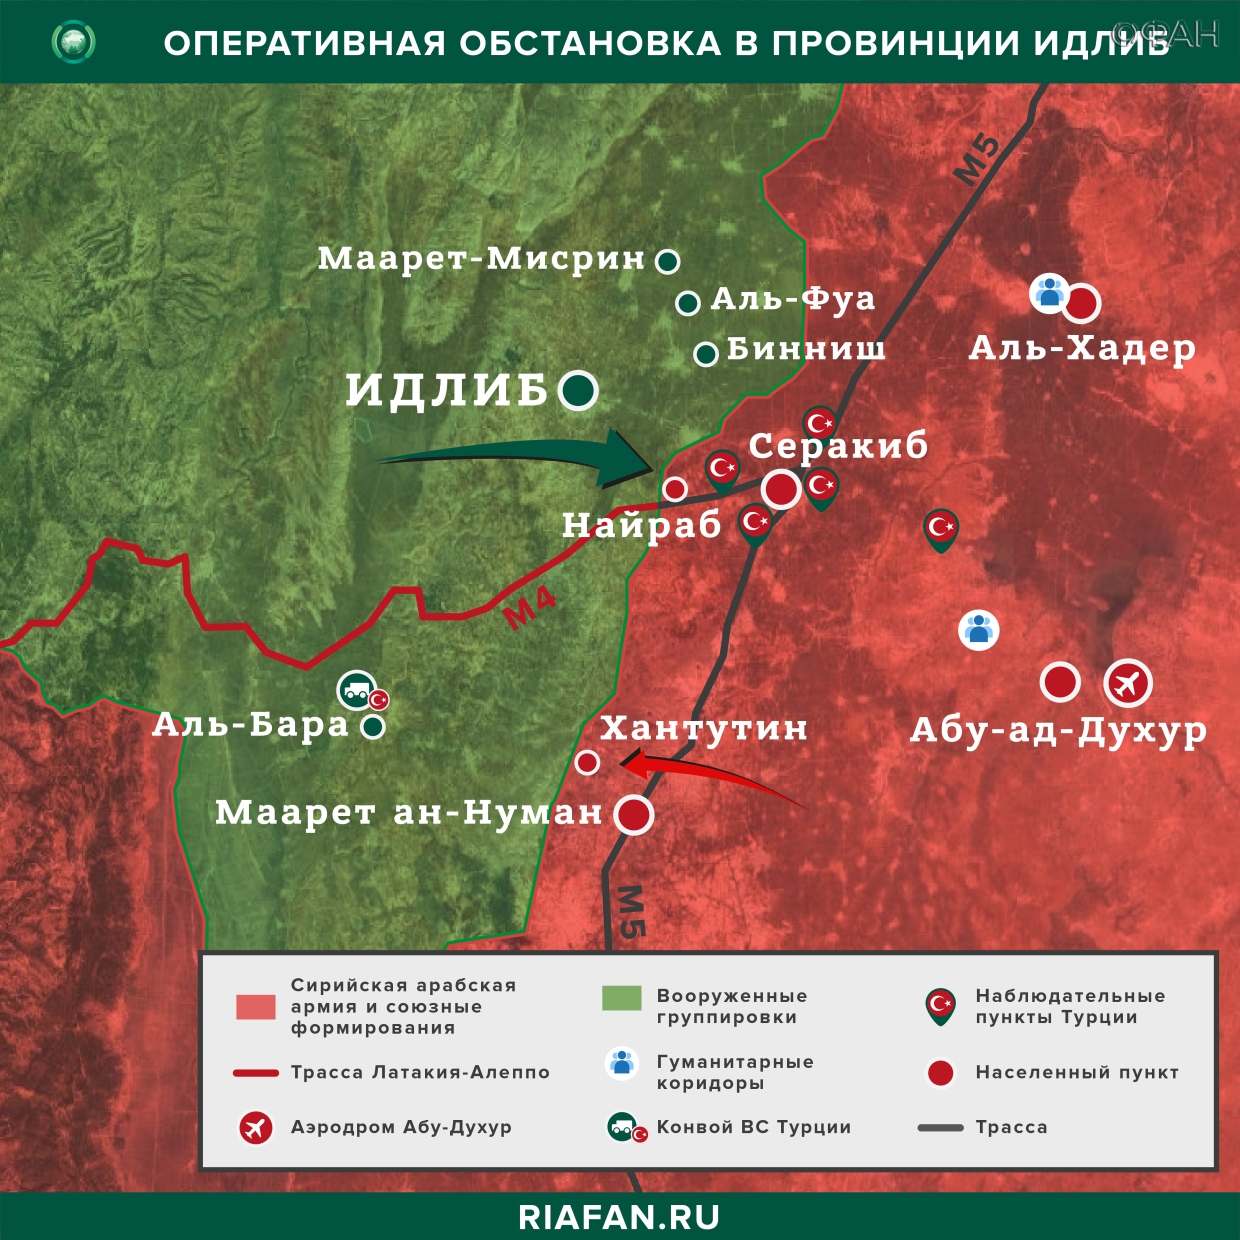 Syria news 24 February 22.30: Russian patrols and Turkey in Cobán, CAA repulsed the attack of militants from Al-Nayraba